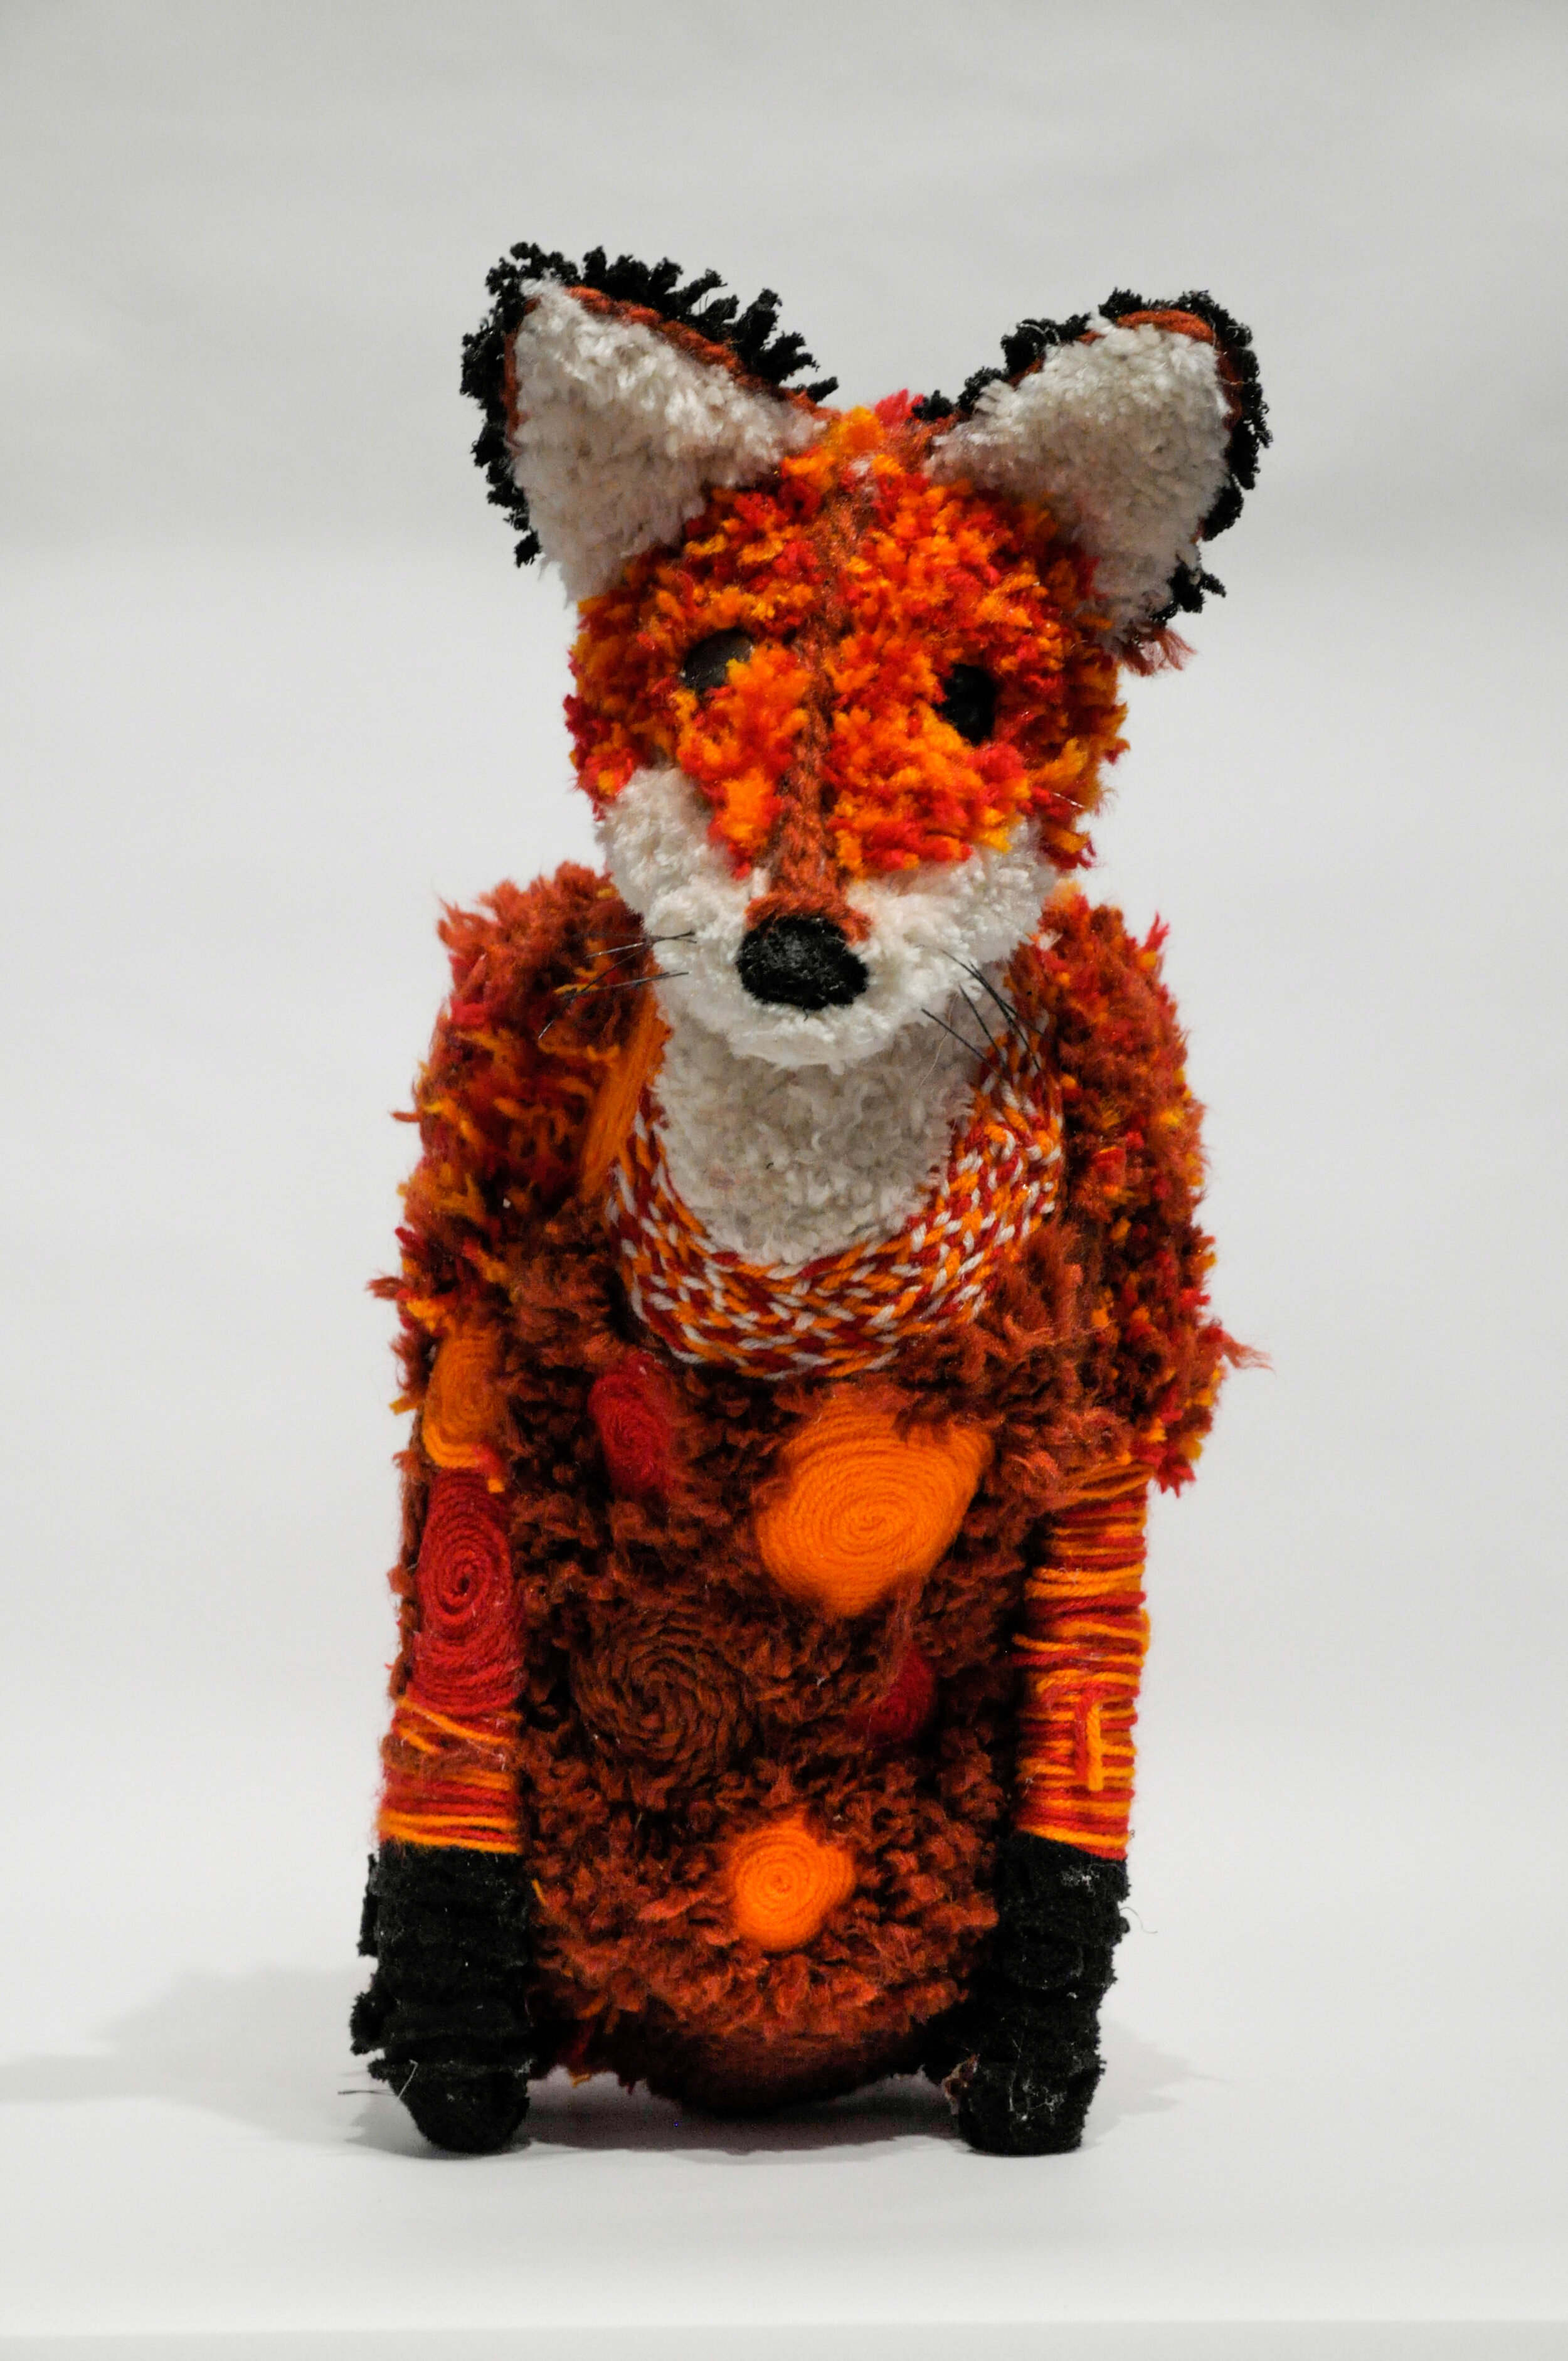  Red Fox by Alice Albaugh 